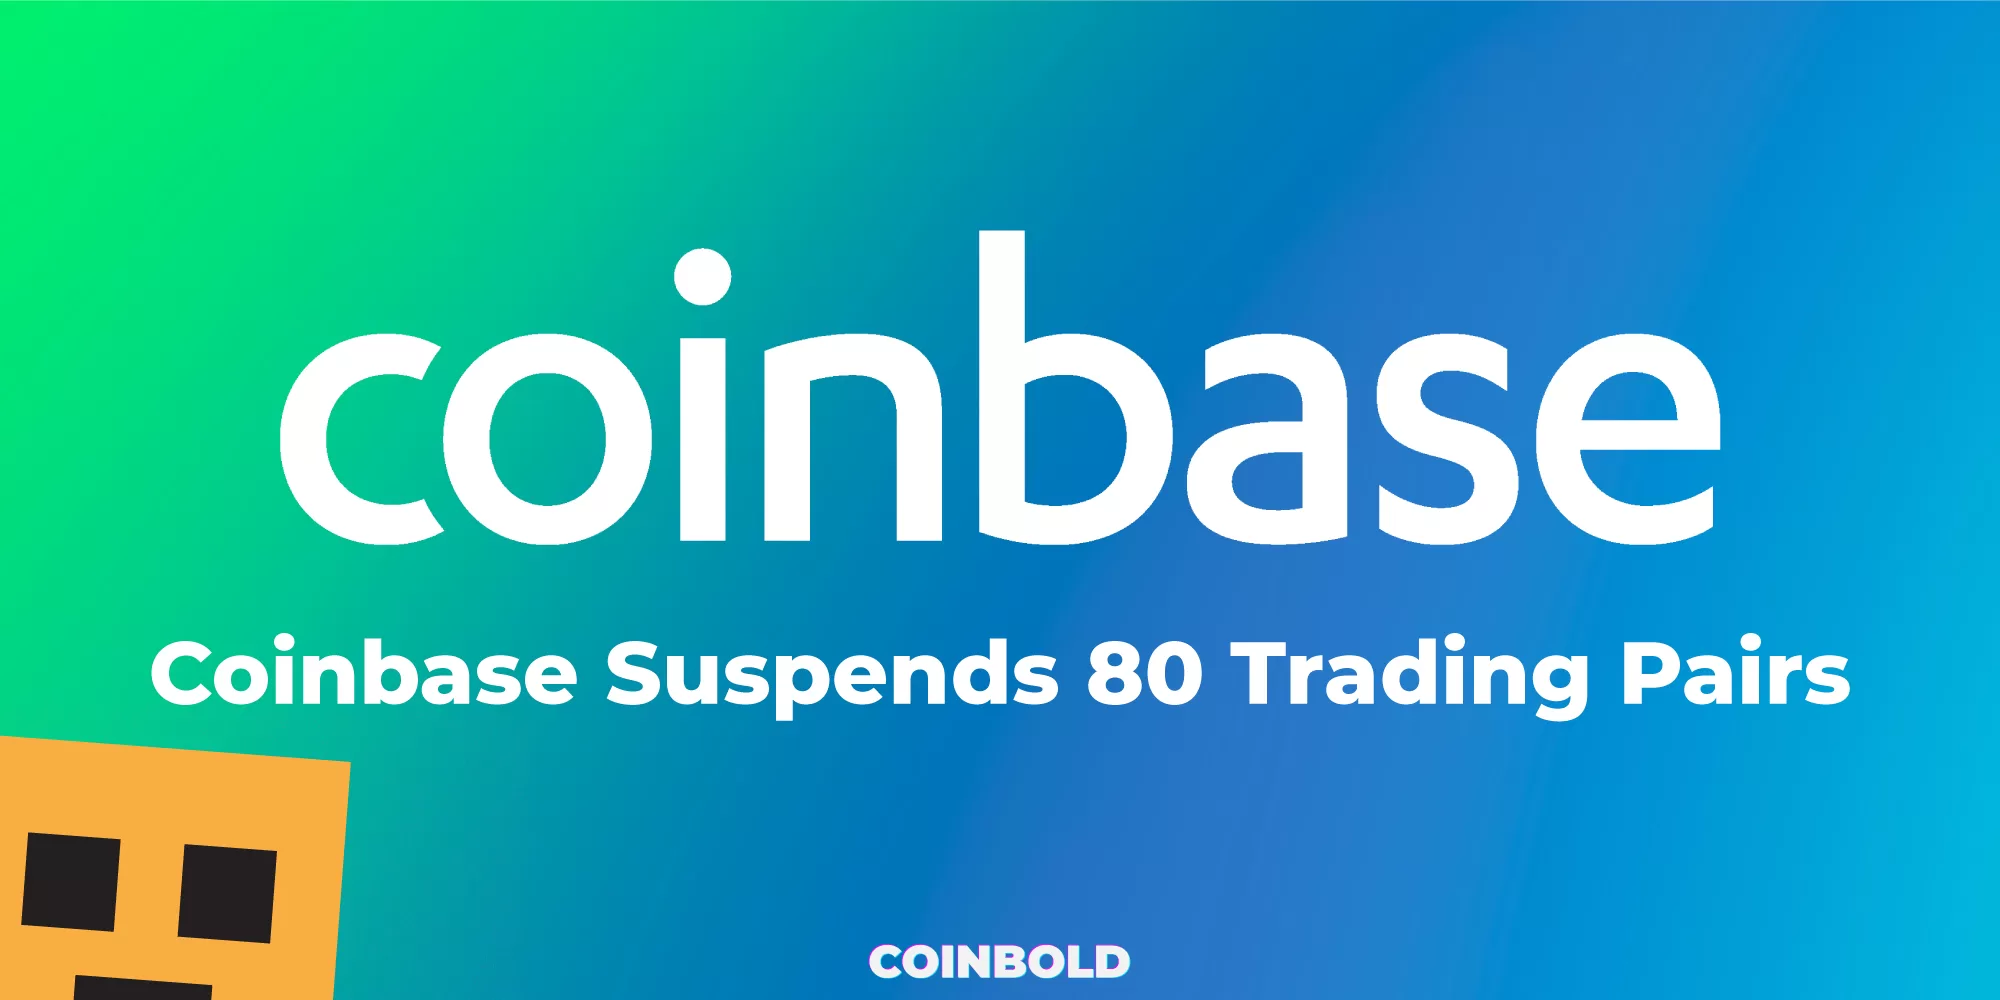 Coinbase Suspends 80 Trading Pairs